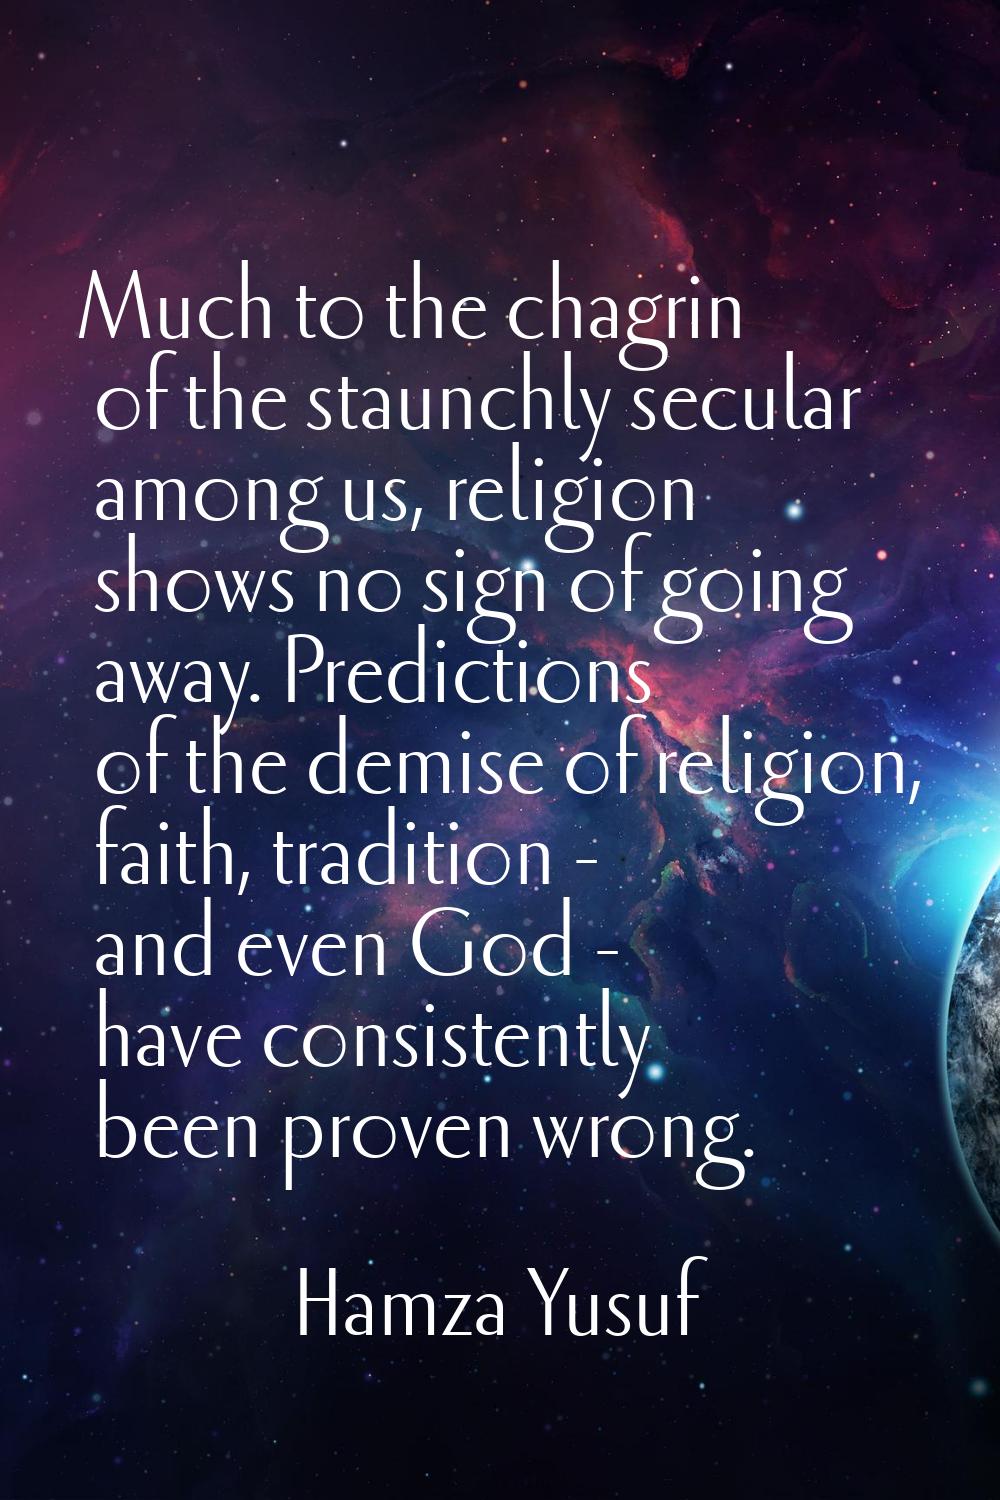 Much to the chagrin of the staunchly secular among us, religion shows no sign of going away. Predic